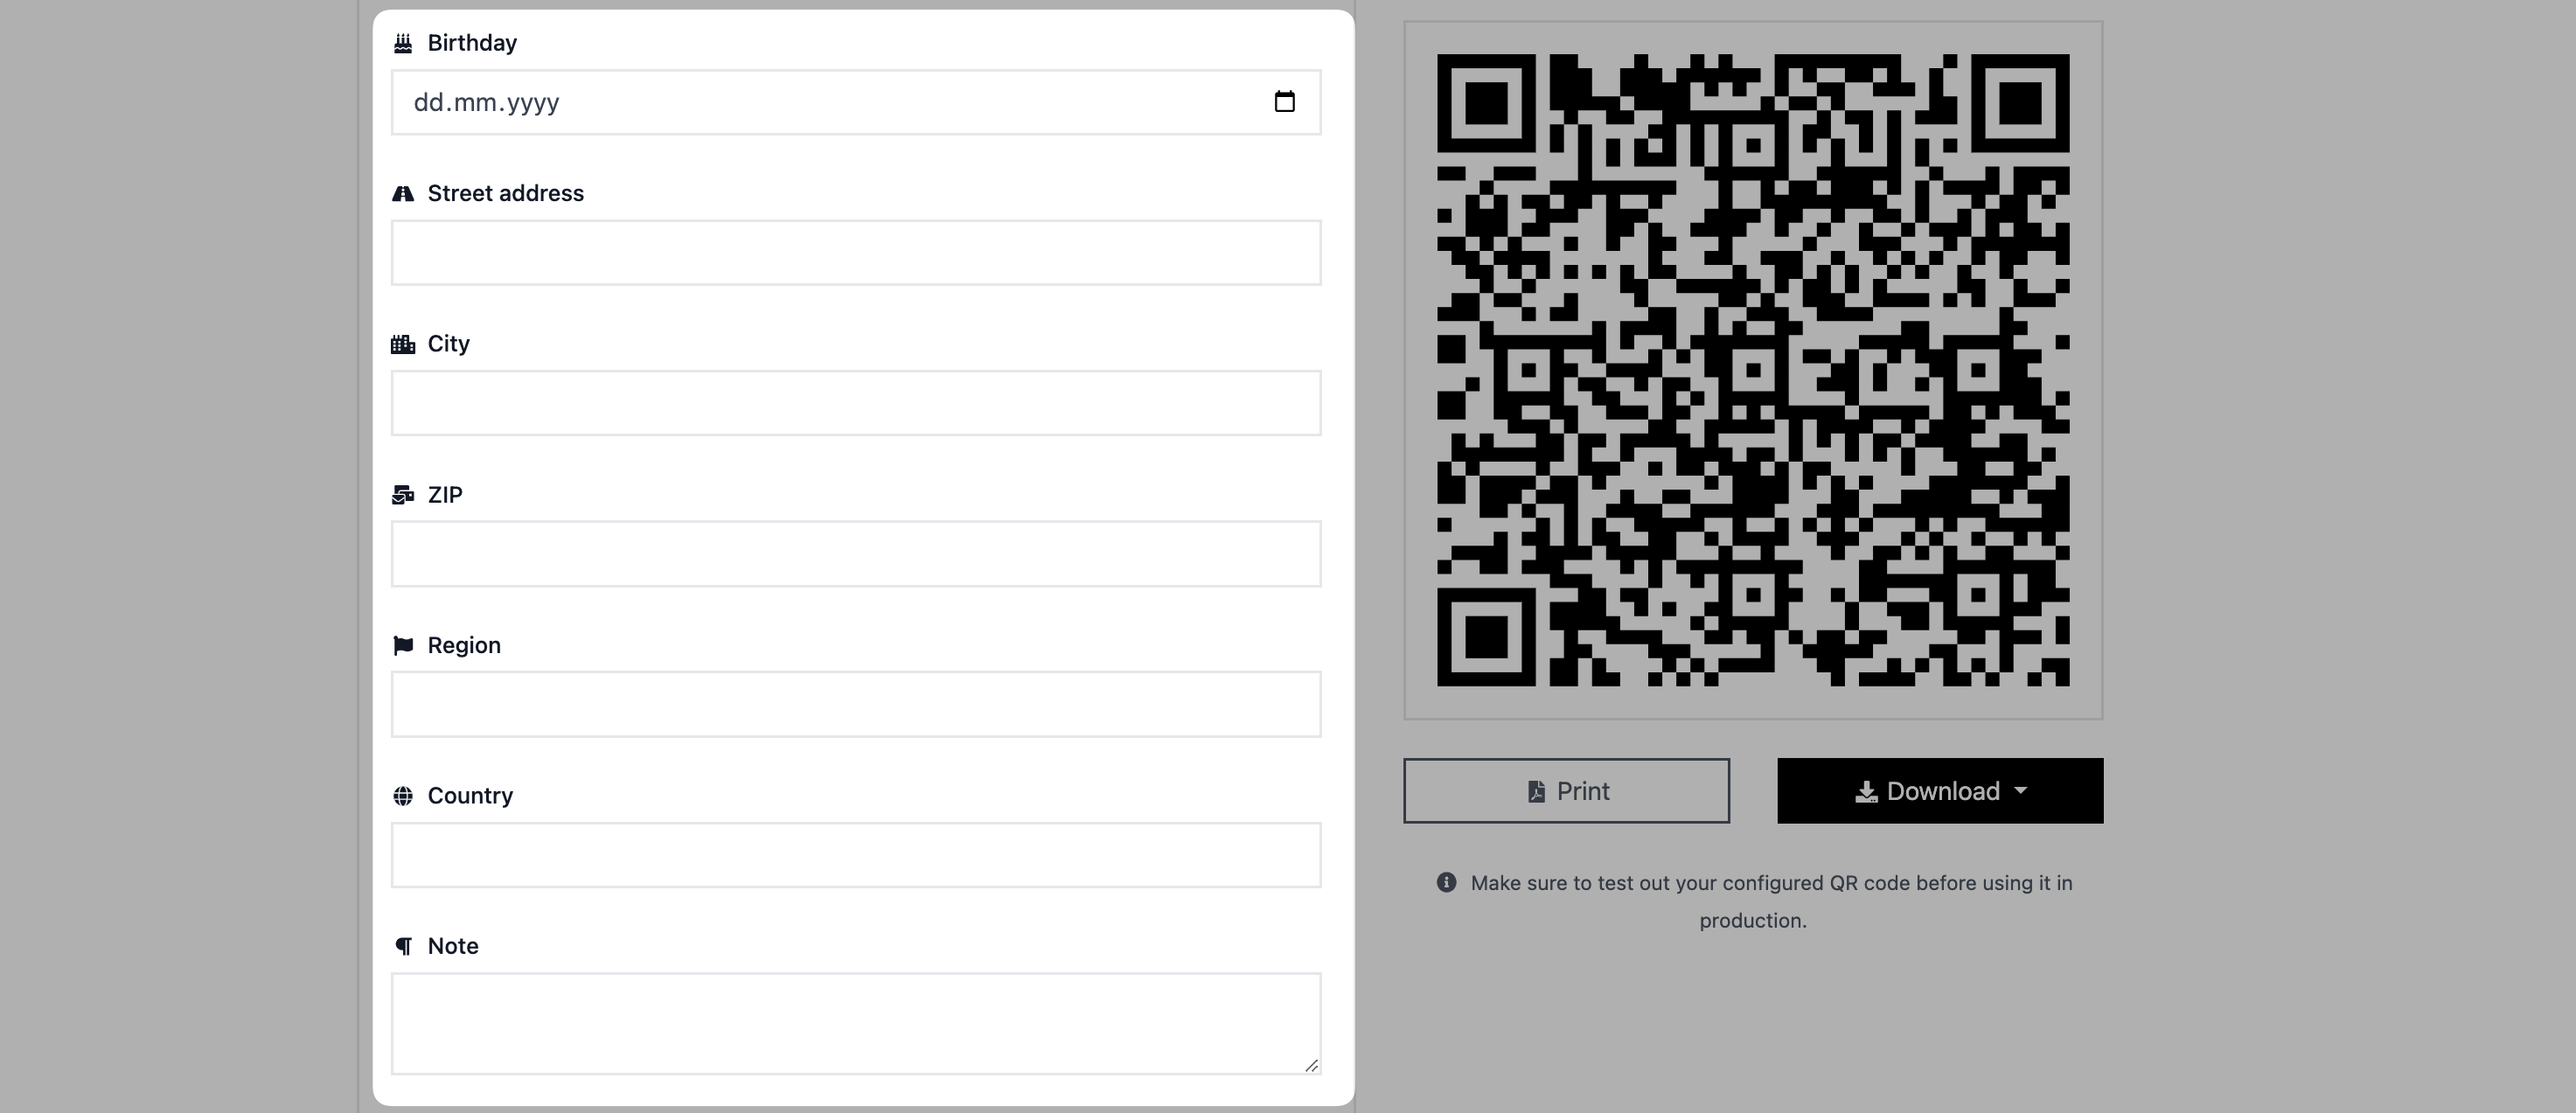 adding birthday address and note details to vcard qr code